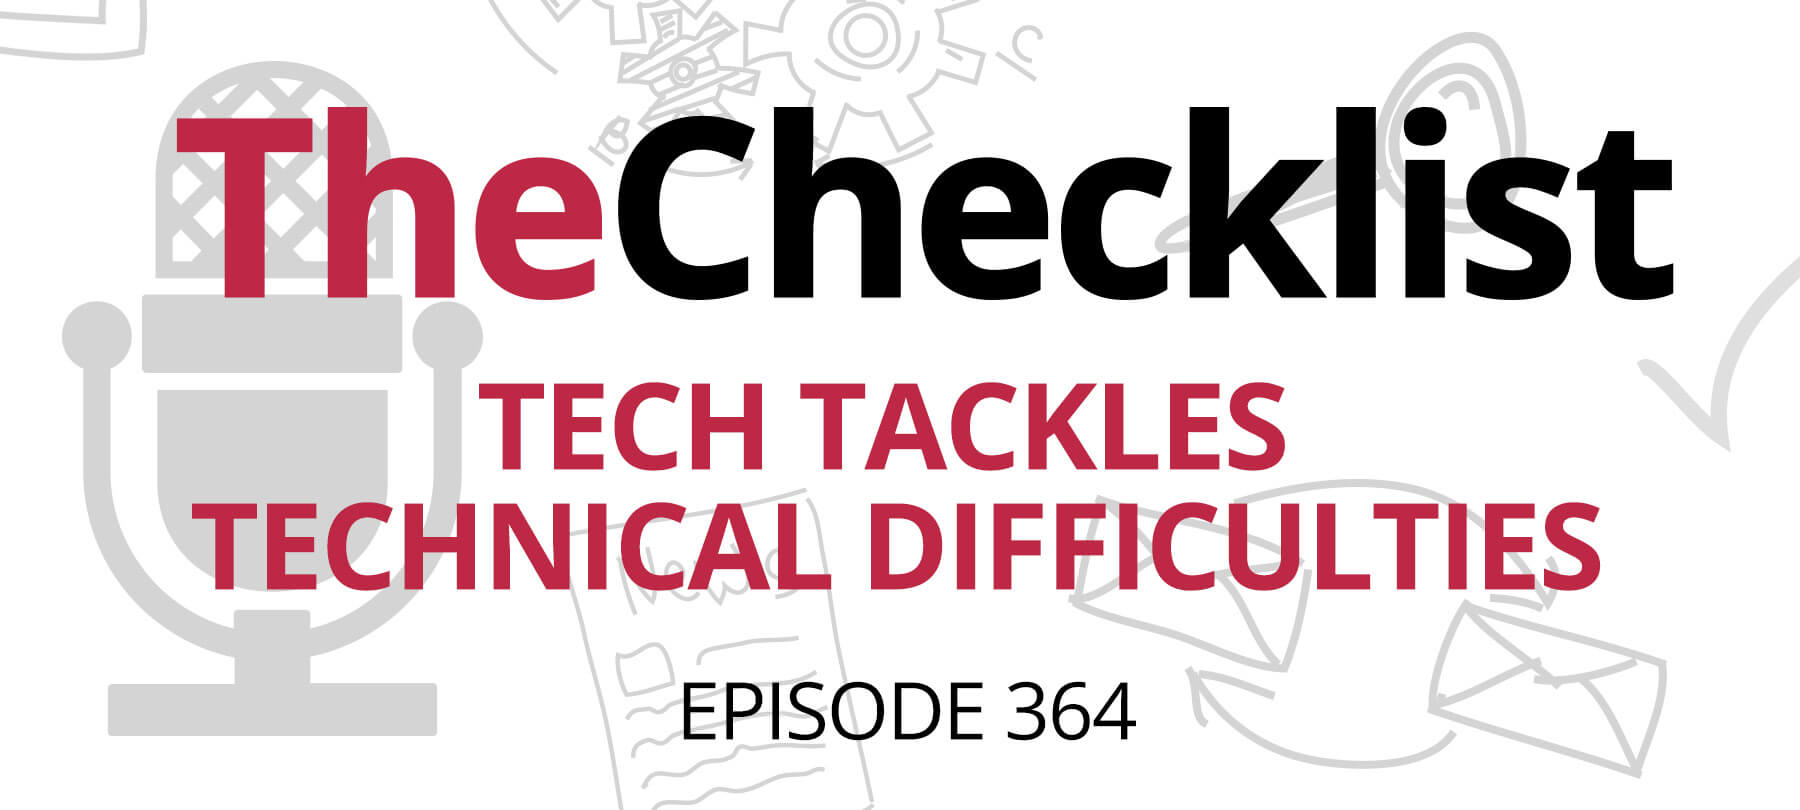 Checklist 364: Tech Tackles Technical Difficulties image